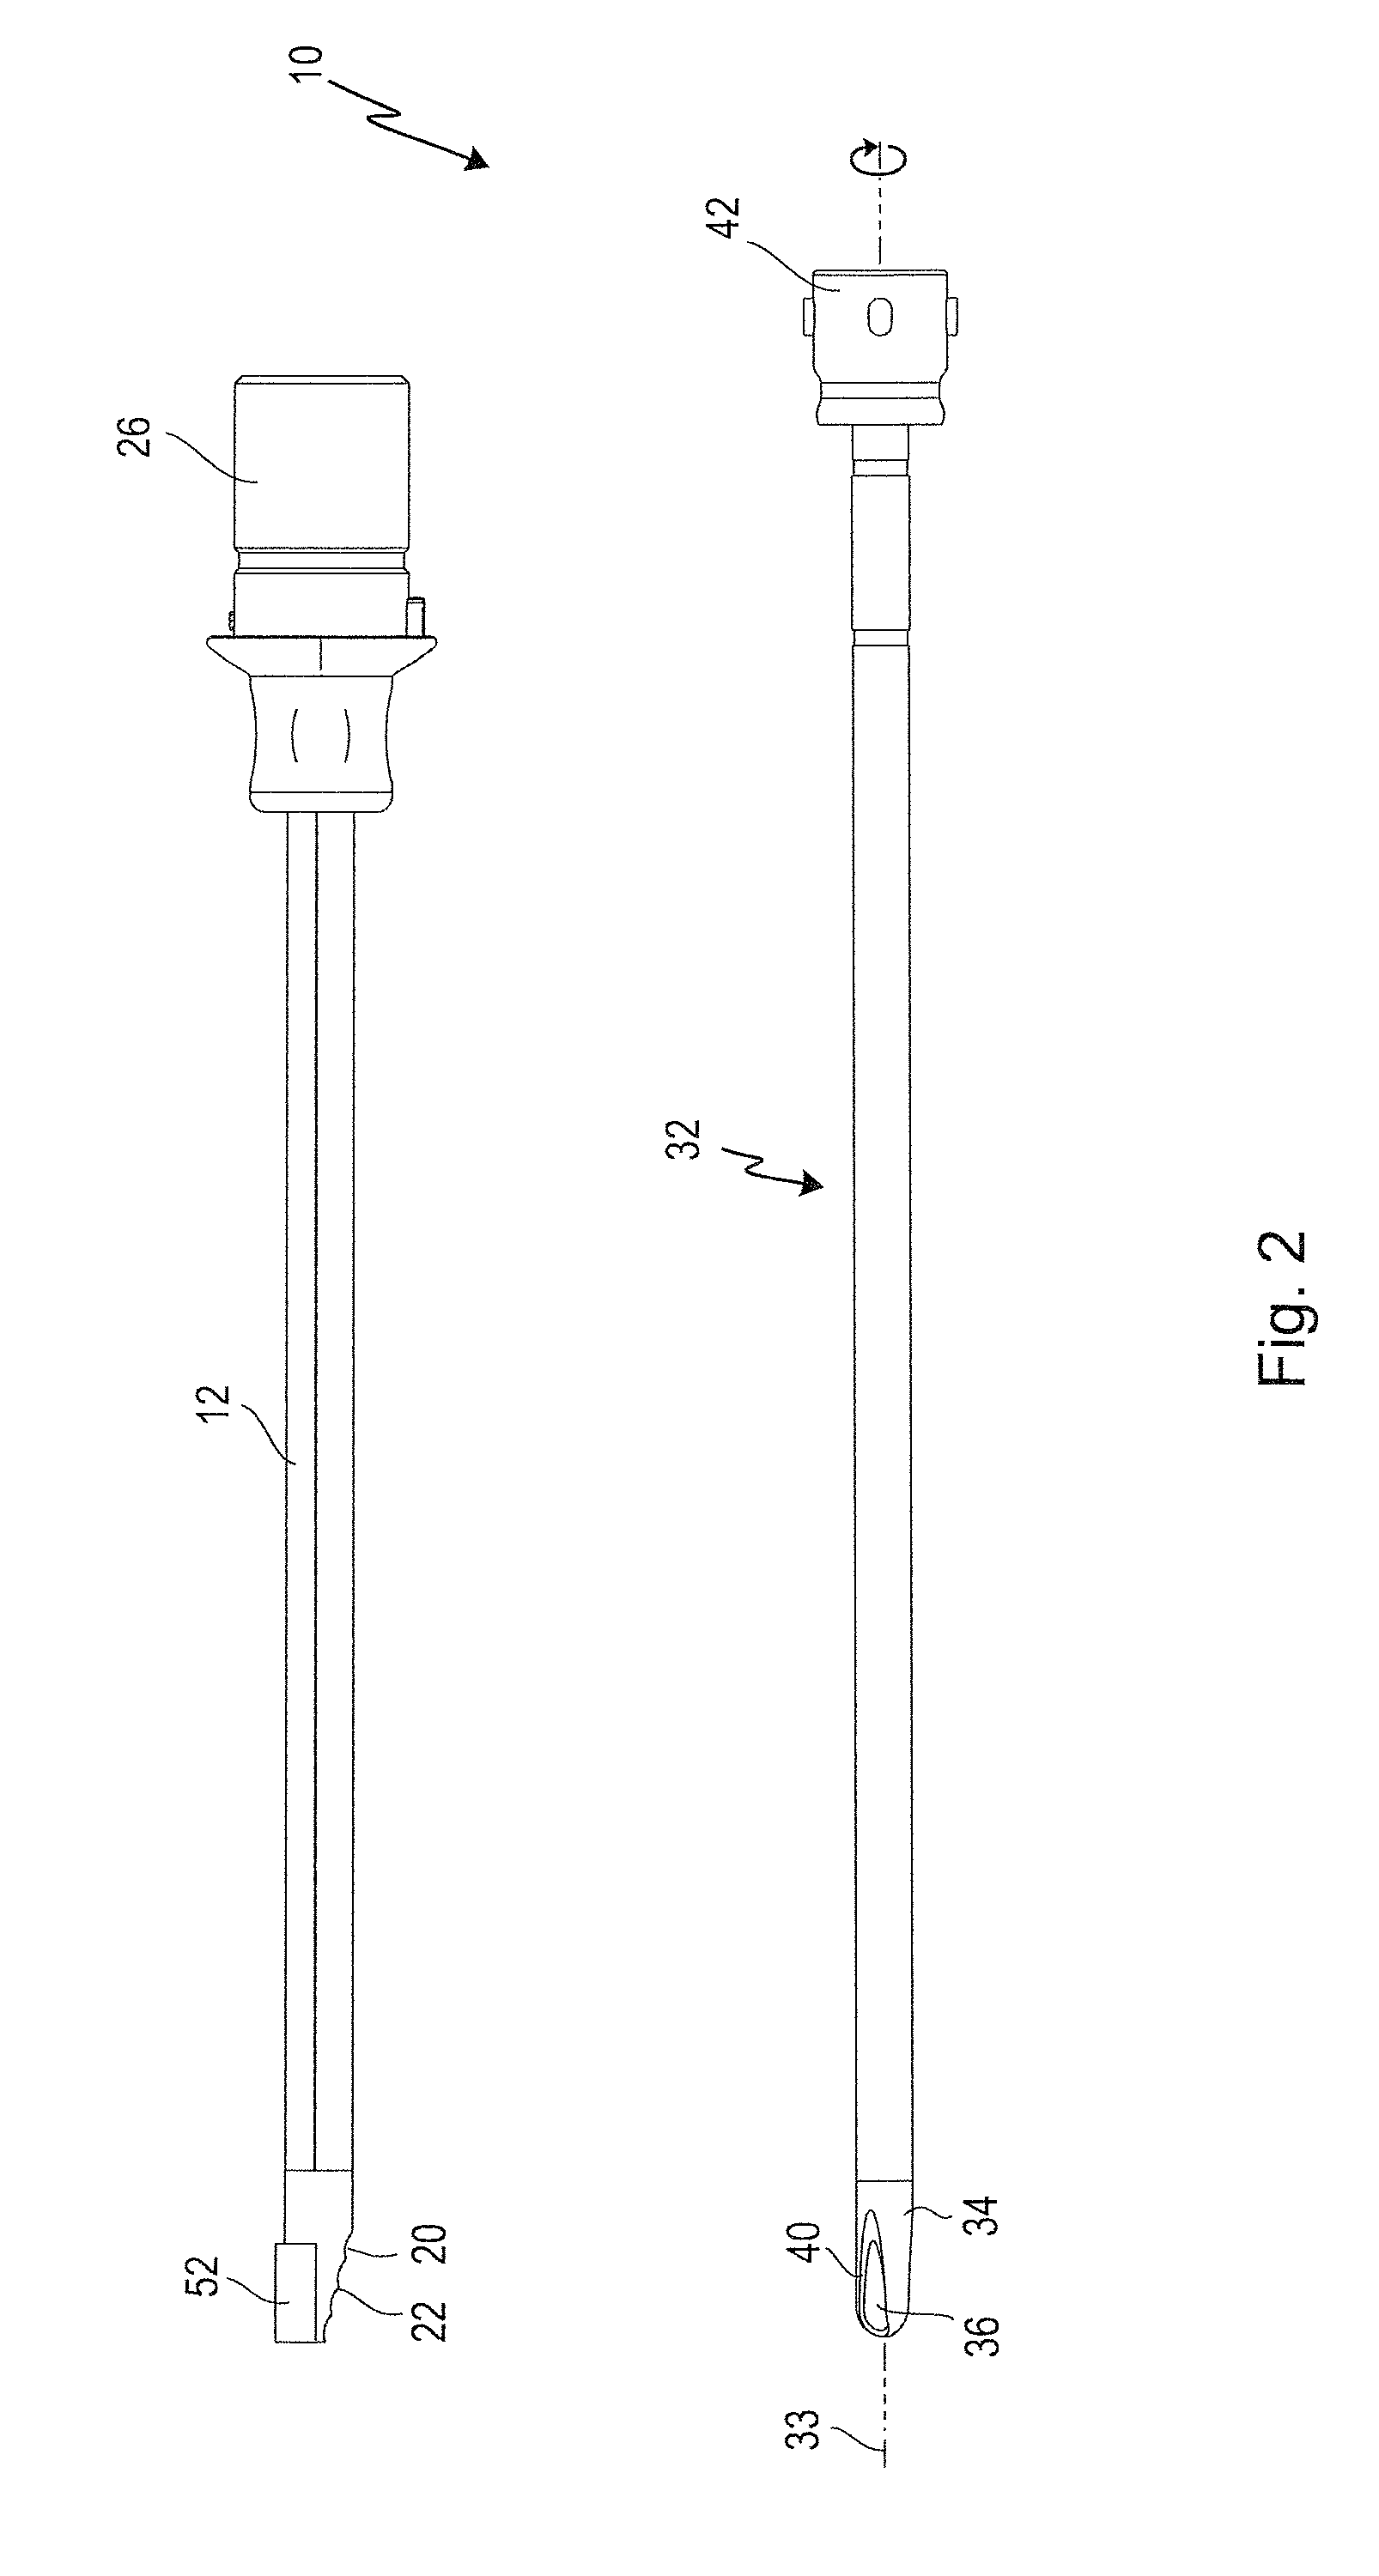 Medical Instrument For Cutting Off Tissue And Cartilage From A Human Or Animal Body